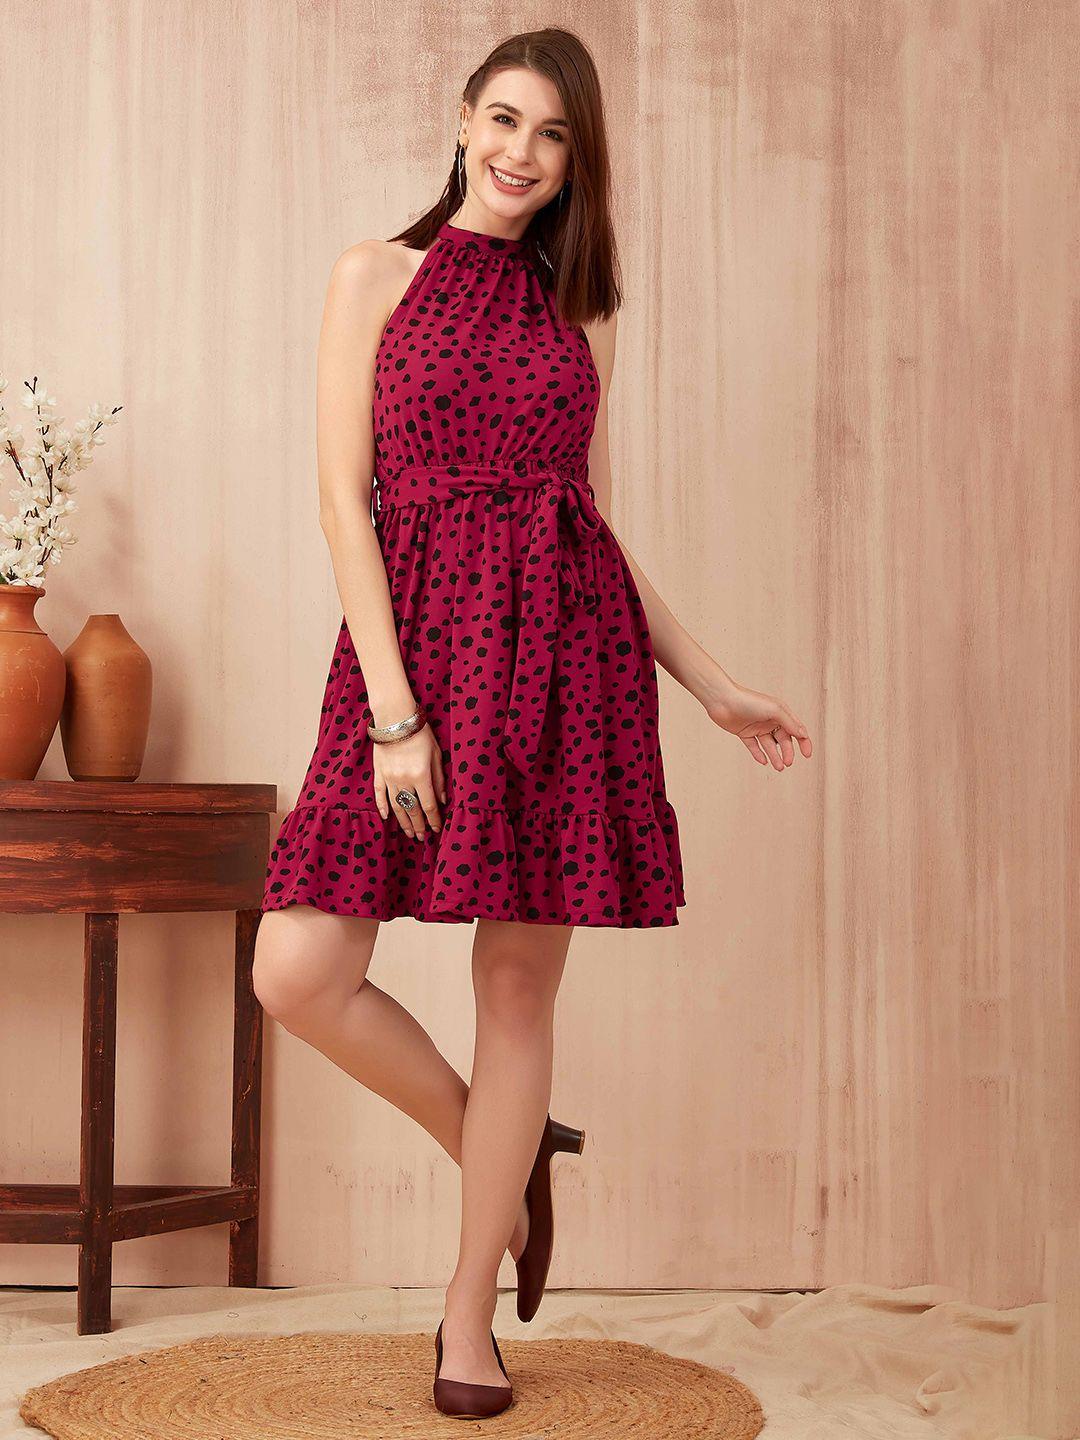 psbt quality on way floral print fit & flare dress